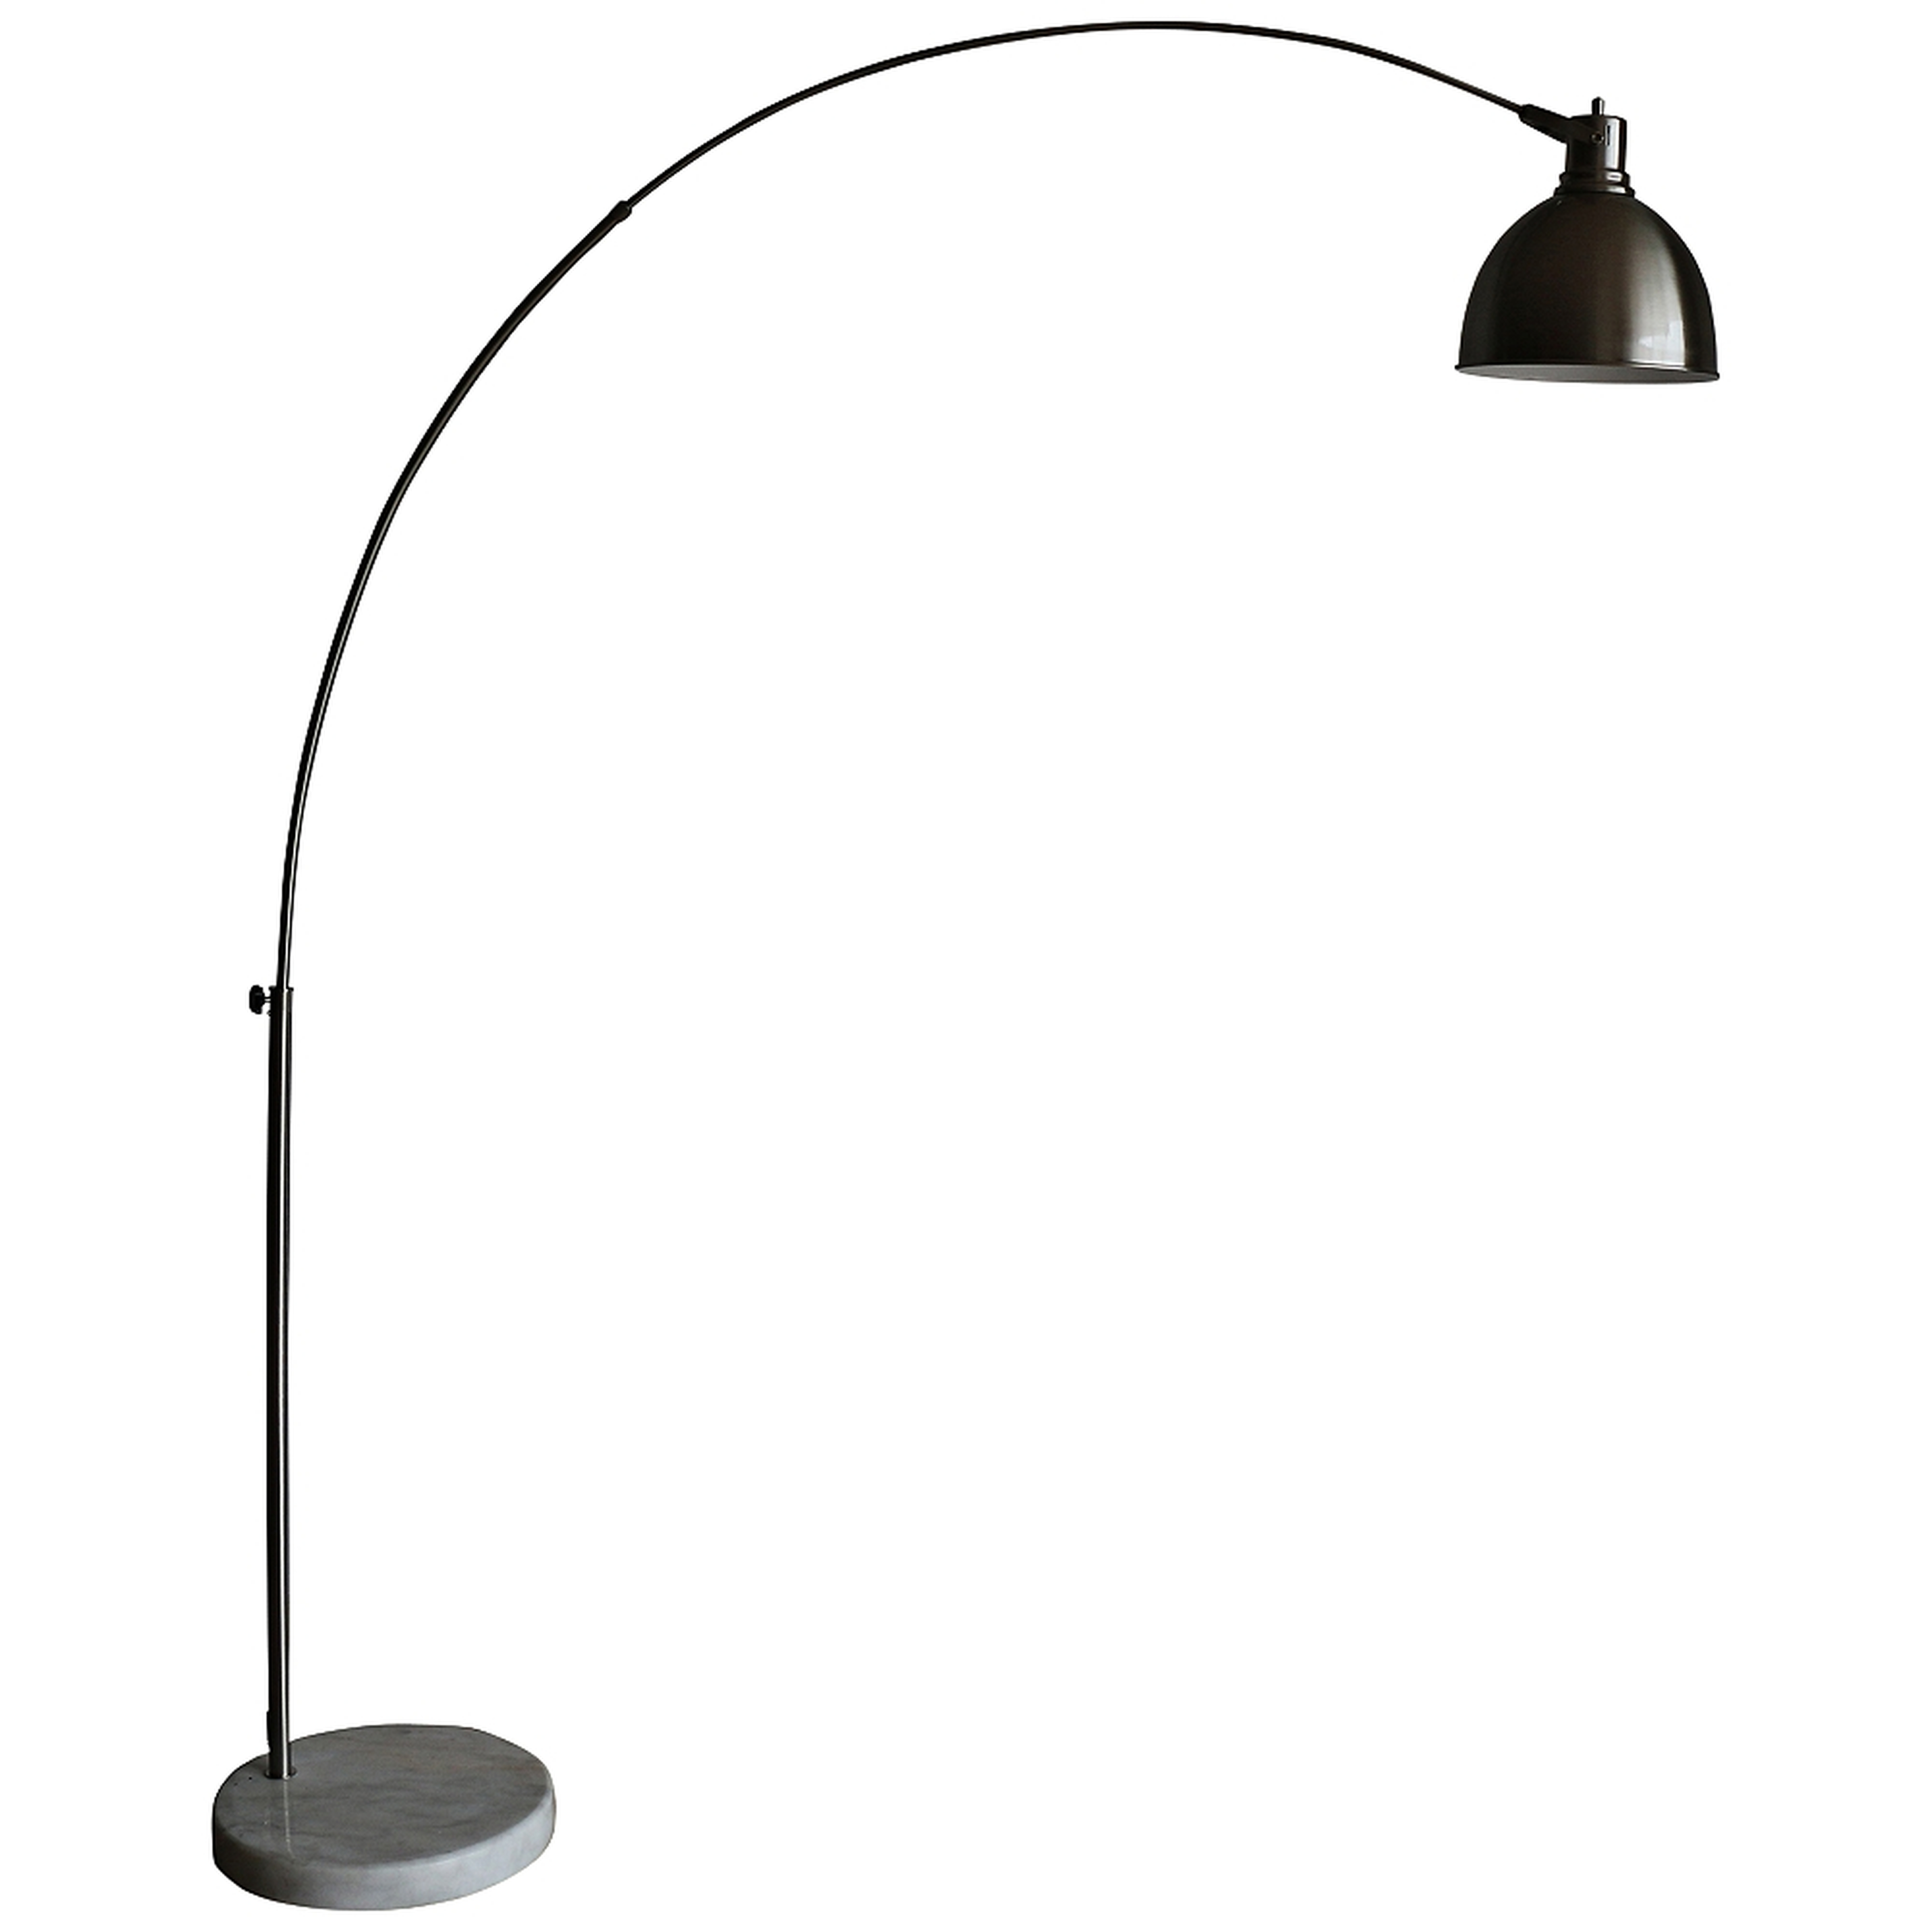 Aria Brushed Steel Arch Floor Lamp with Swivel Studio Head - Style # 55T65 - Lamps Plus